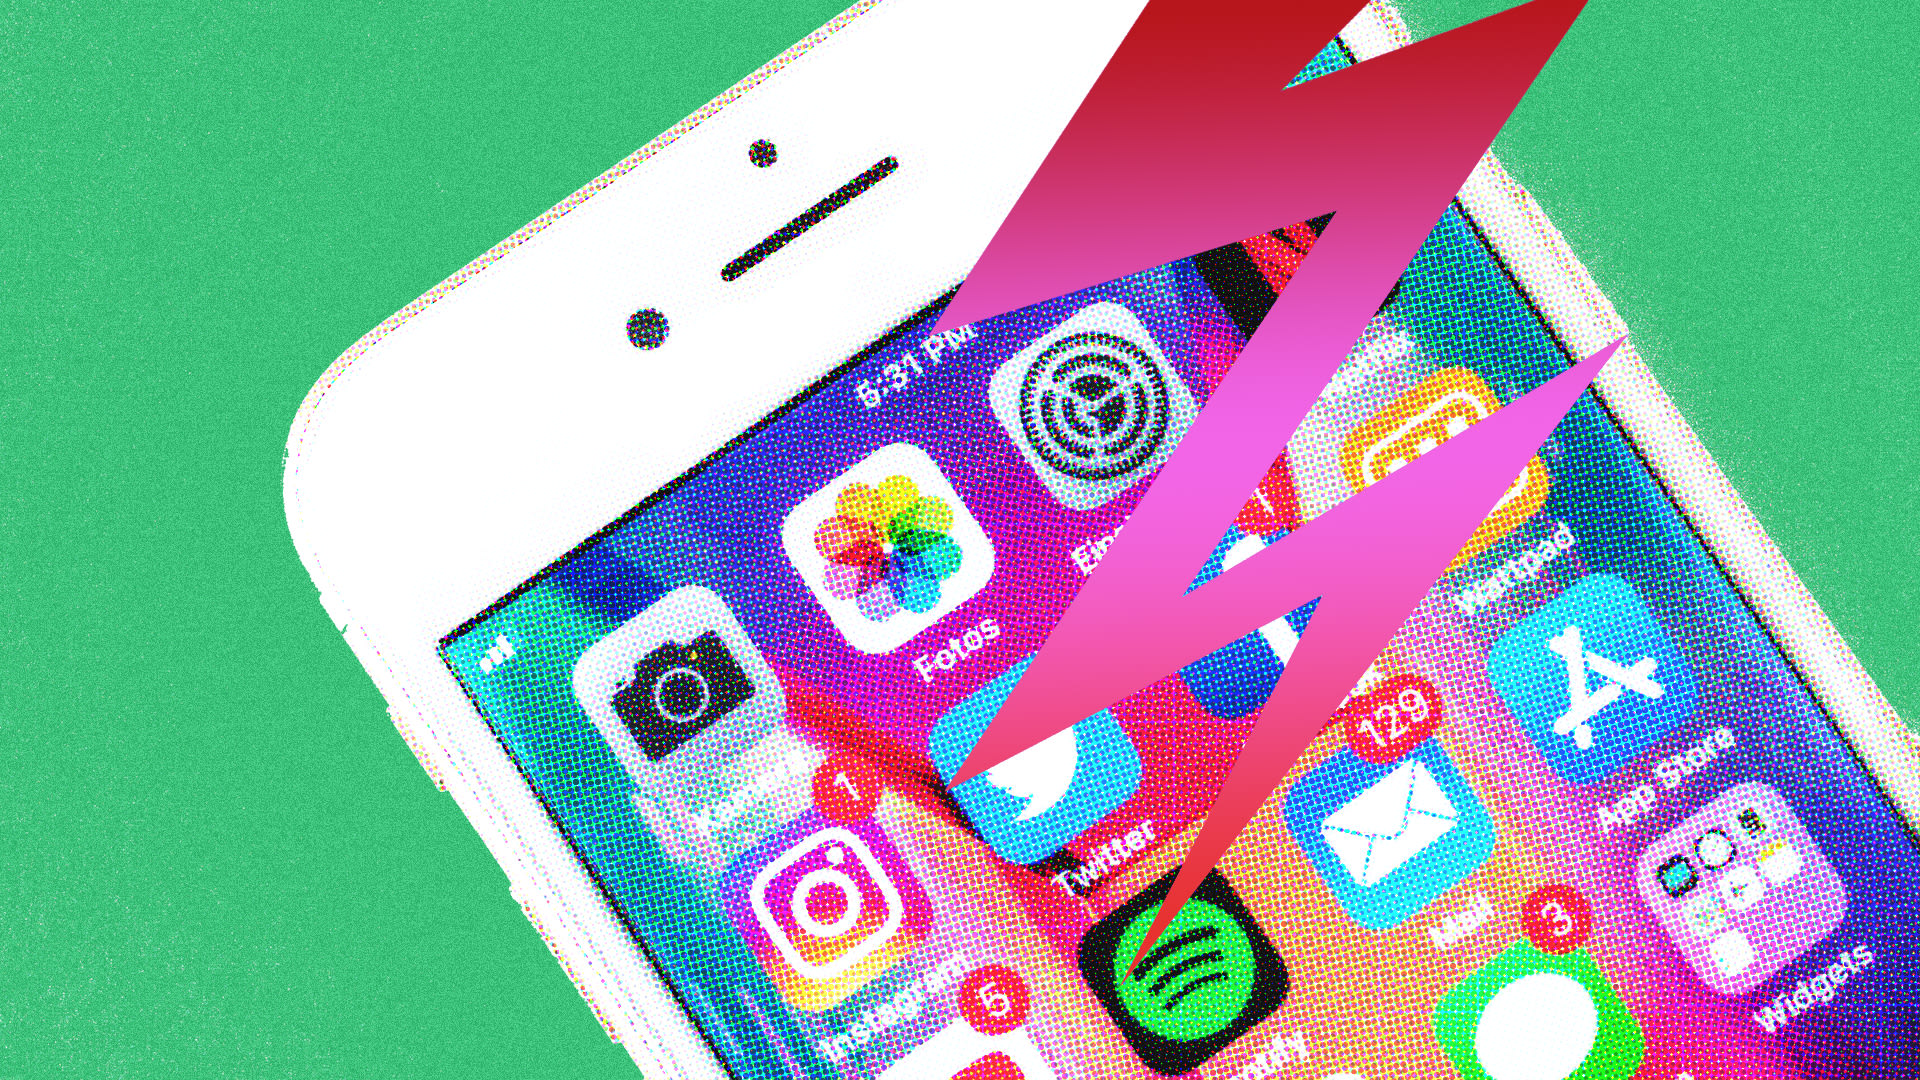 Supercharge your iPhone with these 11 incredibly useful free apps